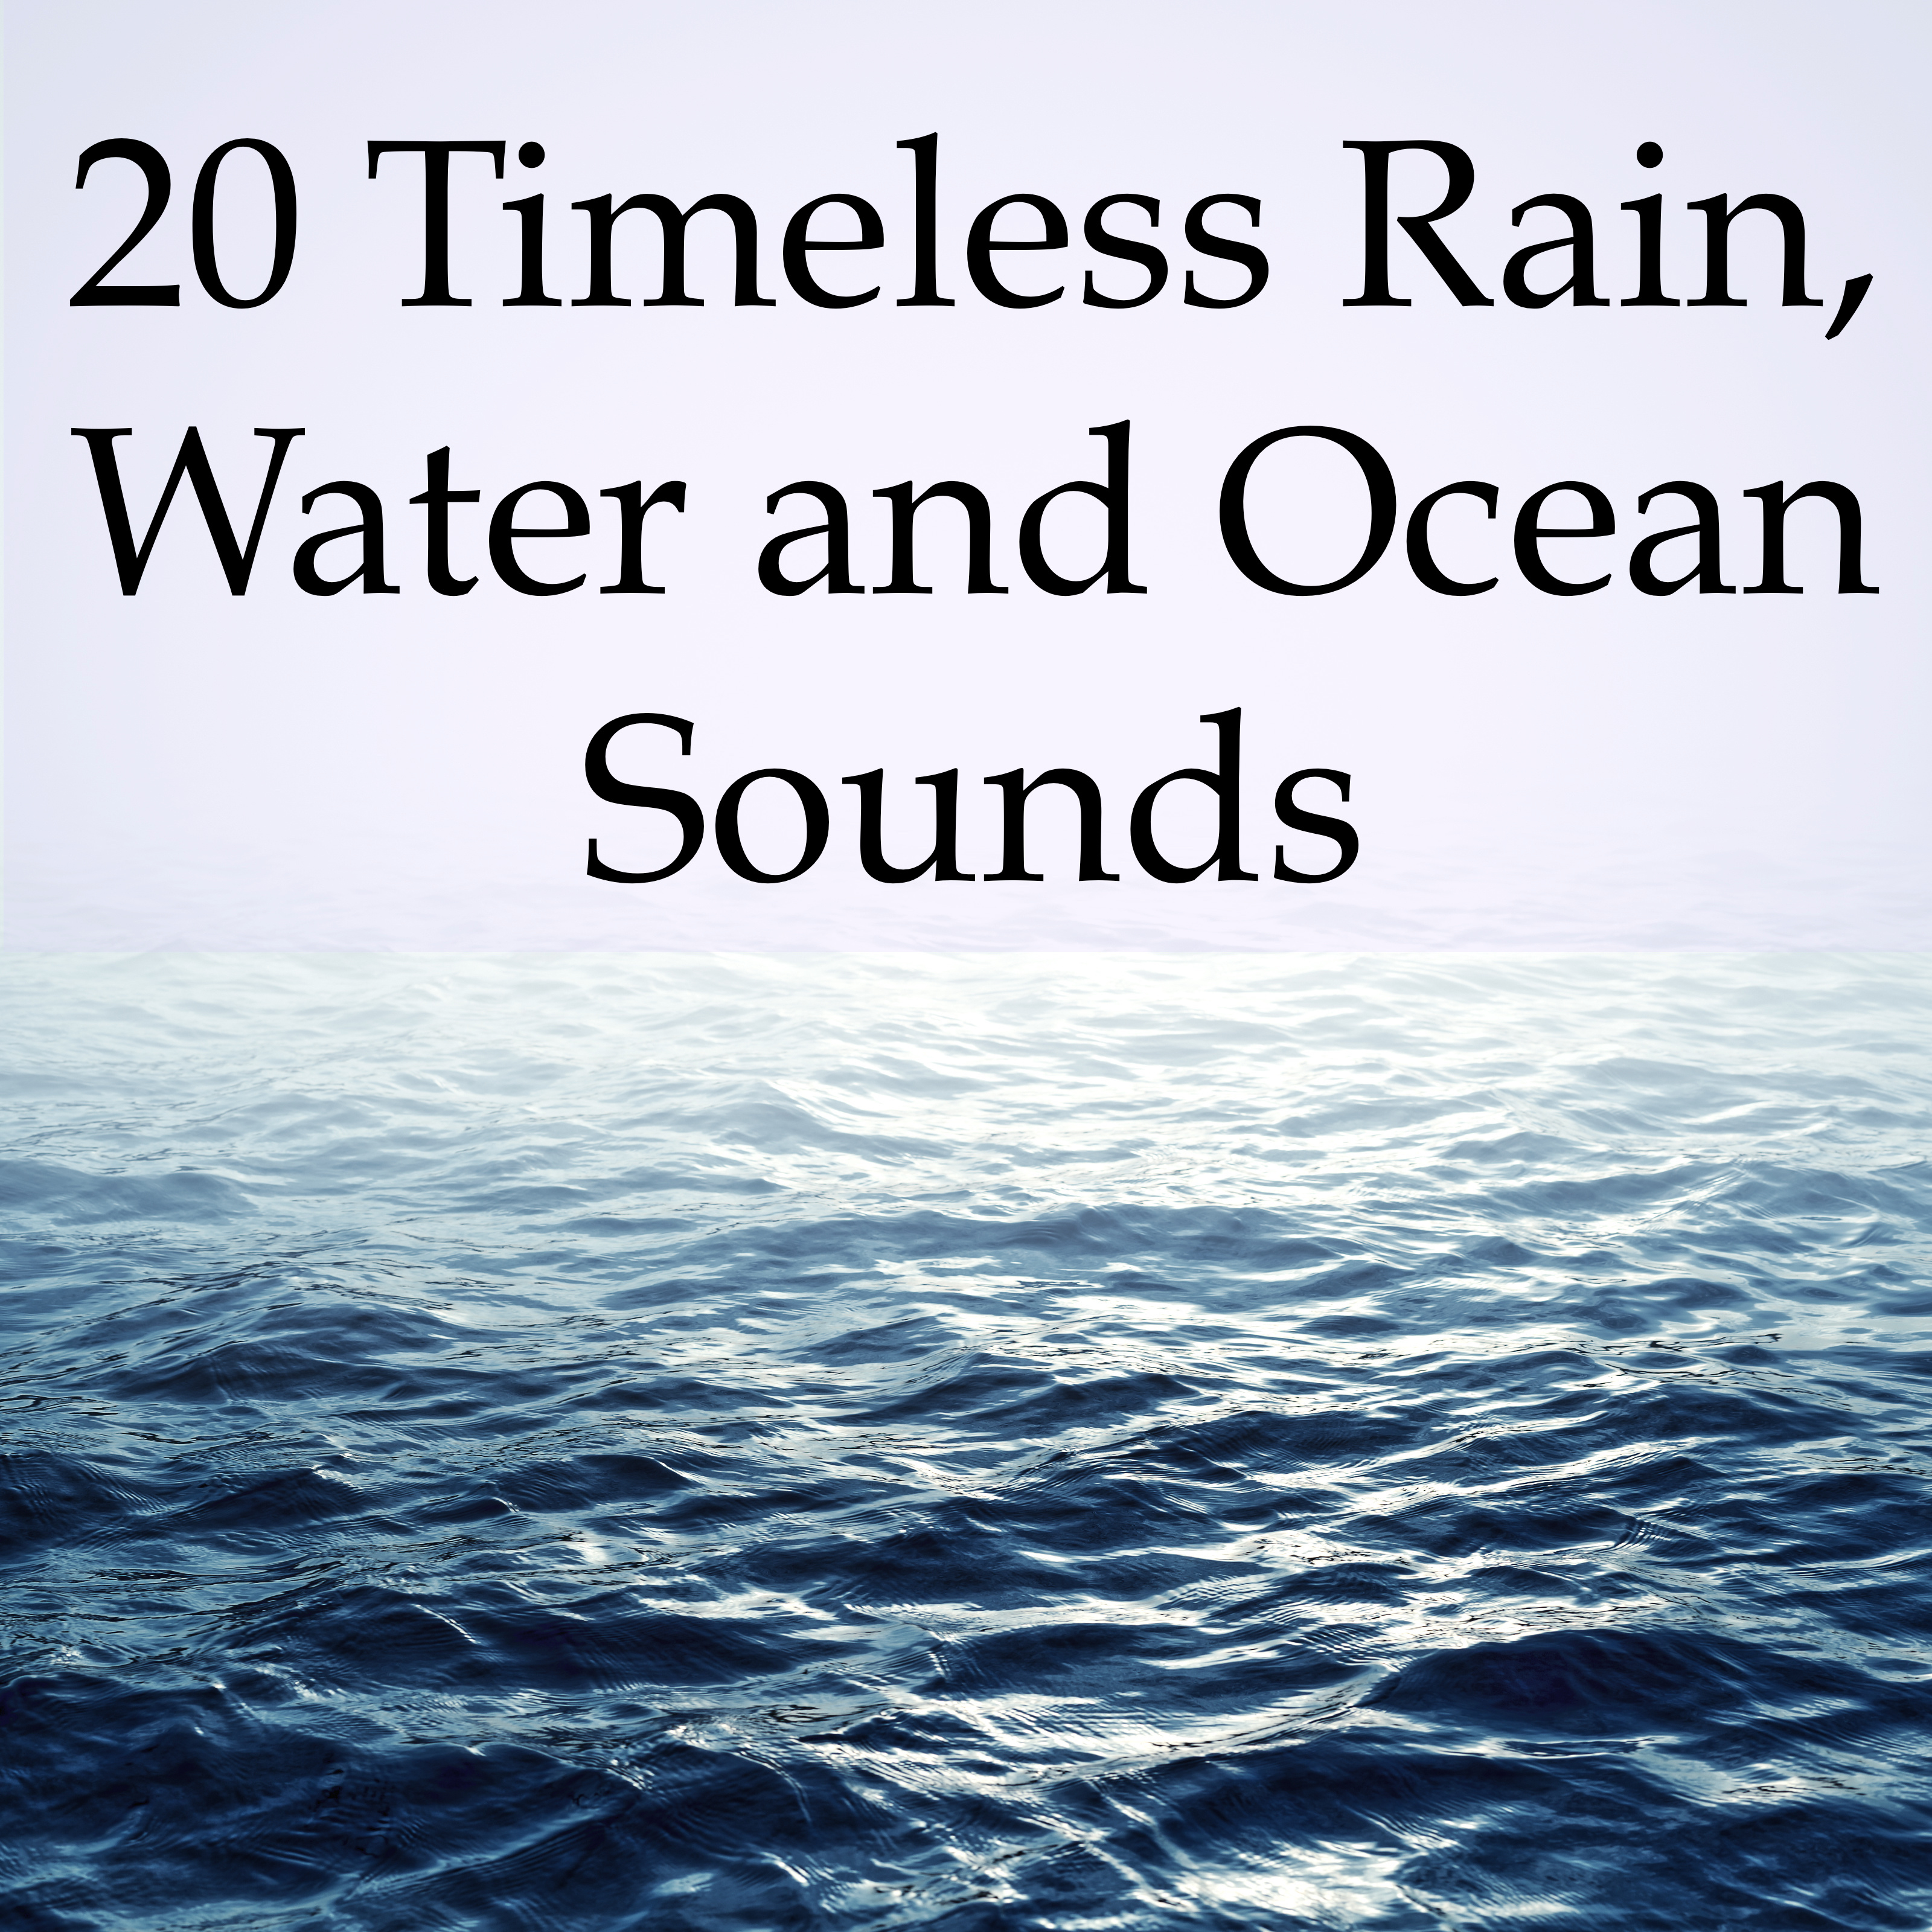 20 Timeless Rain, Water and Ocean Sounds - A Relaxing Compilation to Overcome Stress, Anxiety, Help You Fall Asleep, Meditate and Improve Your Health and Happiness